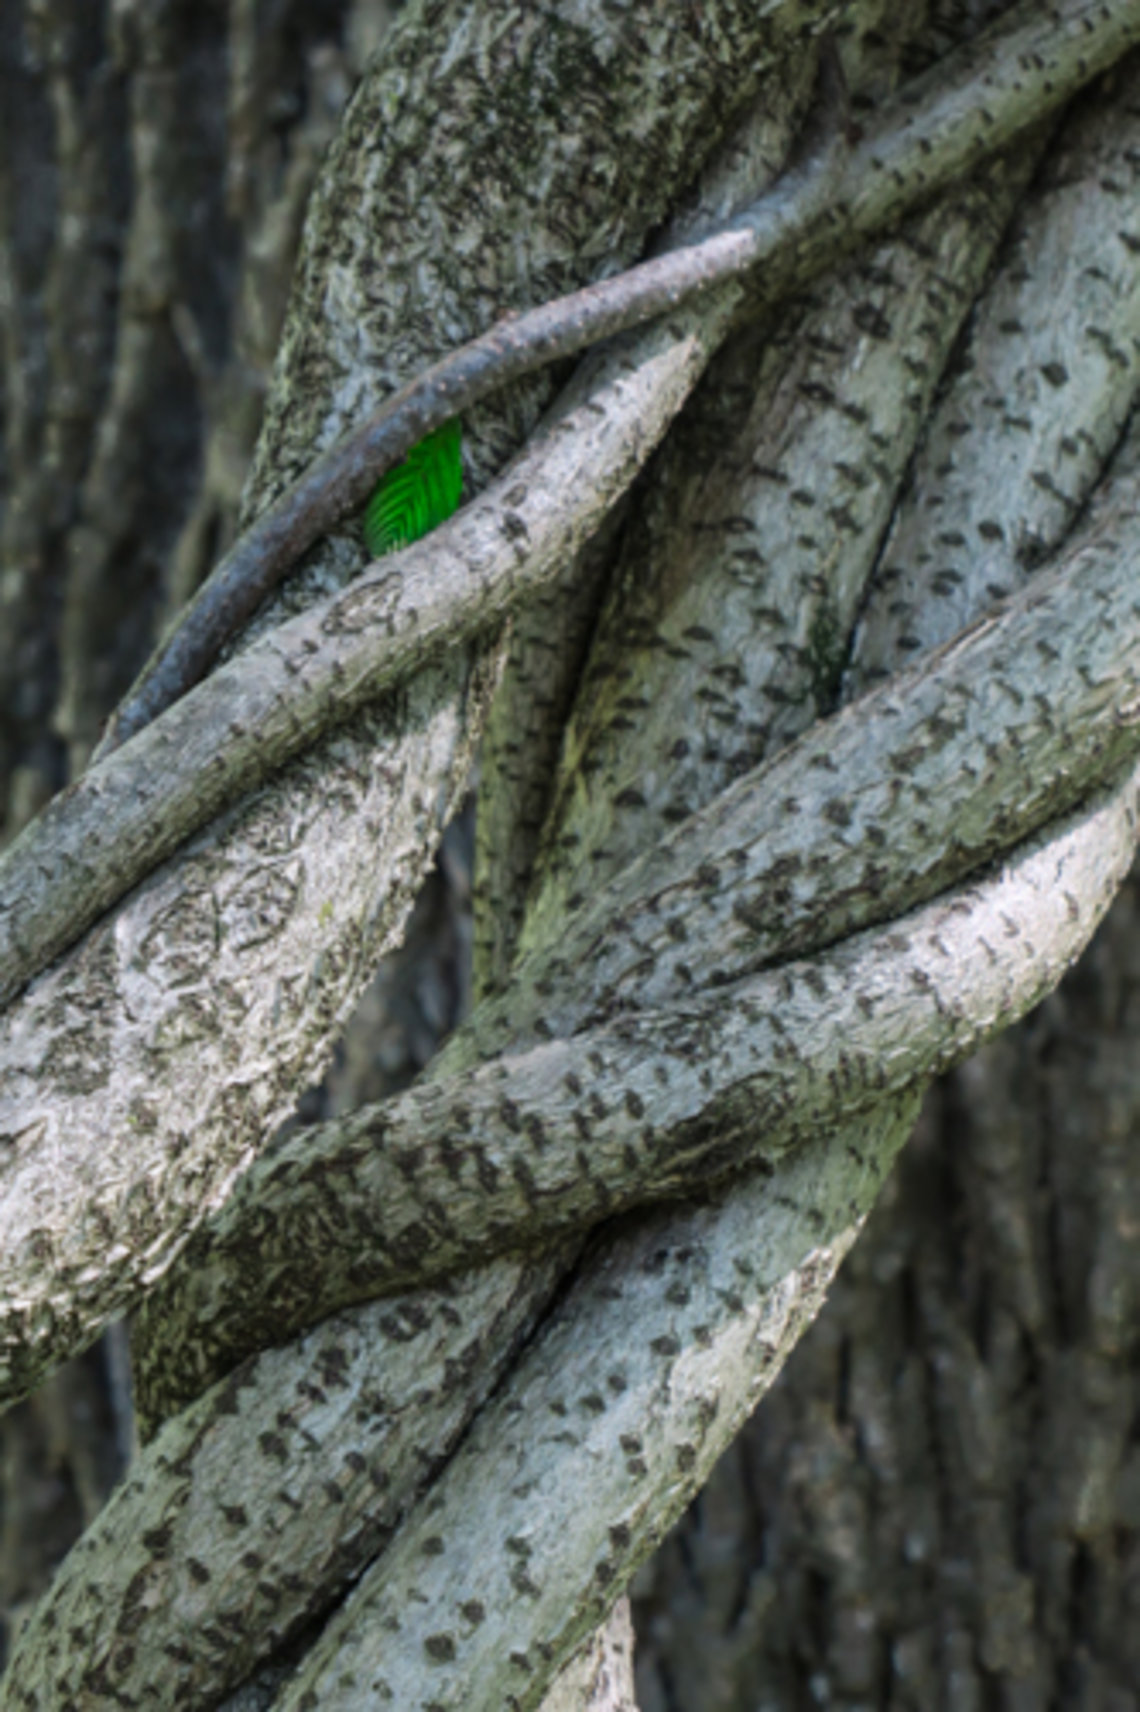 A tiny green leaf sits inside the knotted branches of a tree.